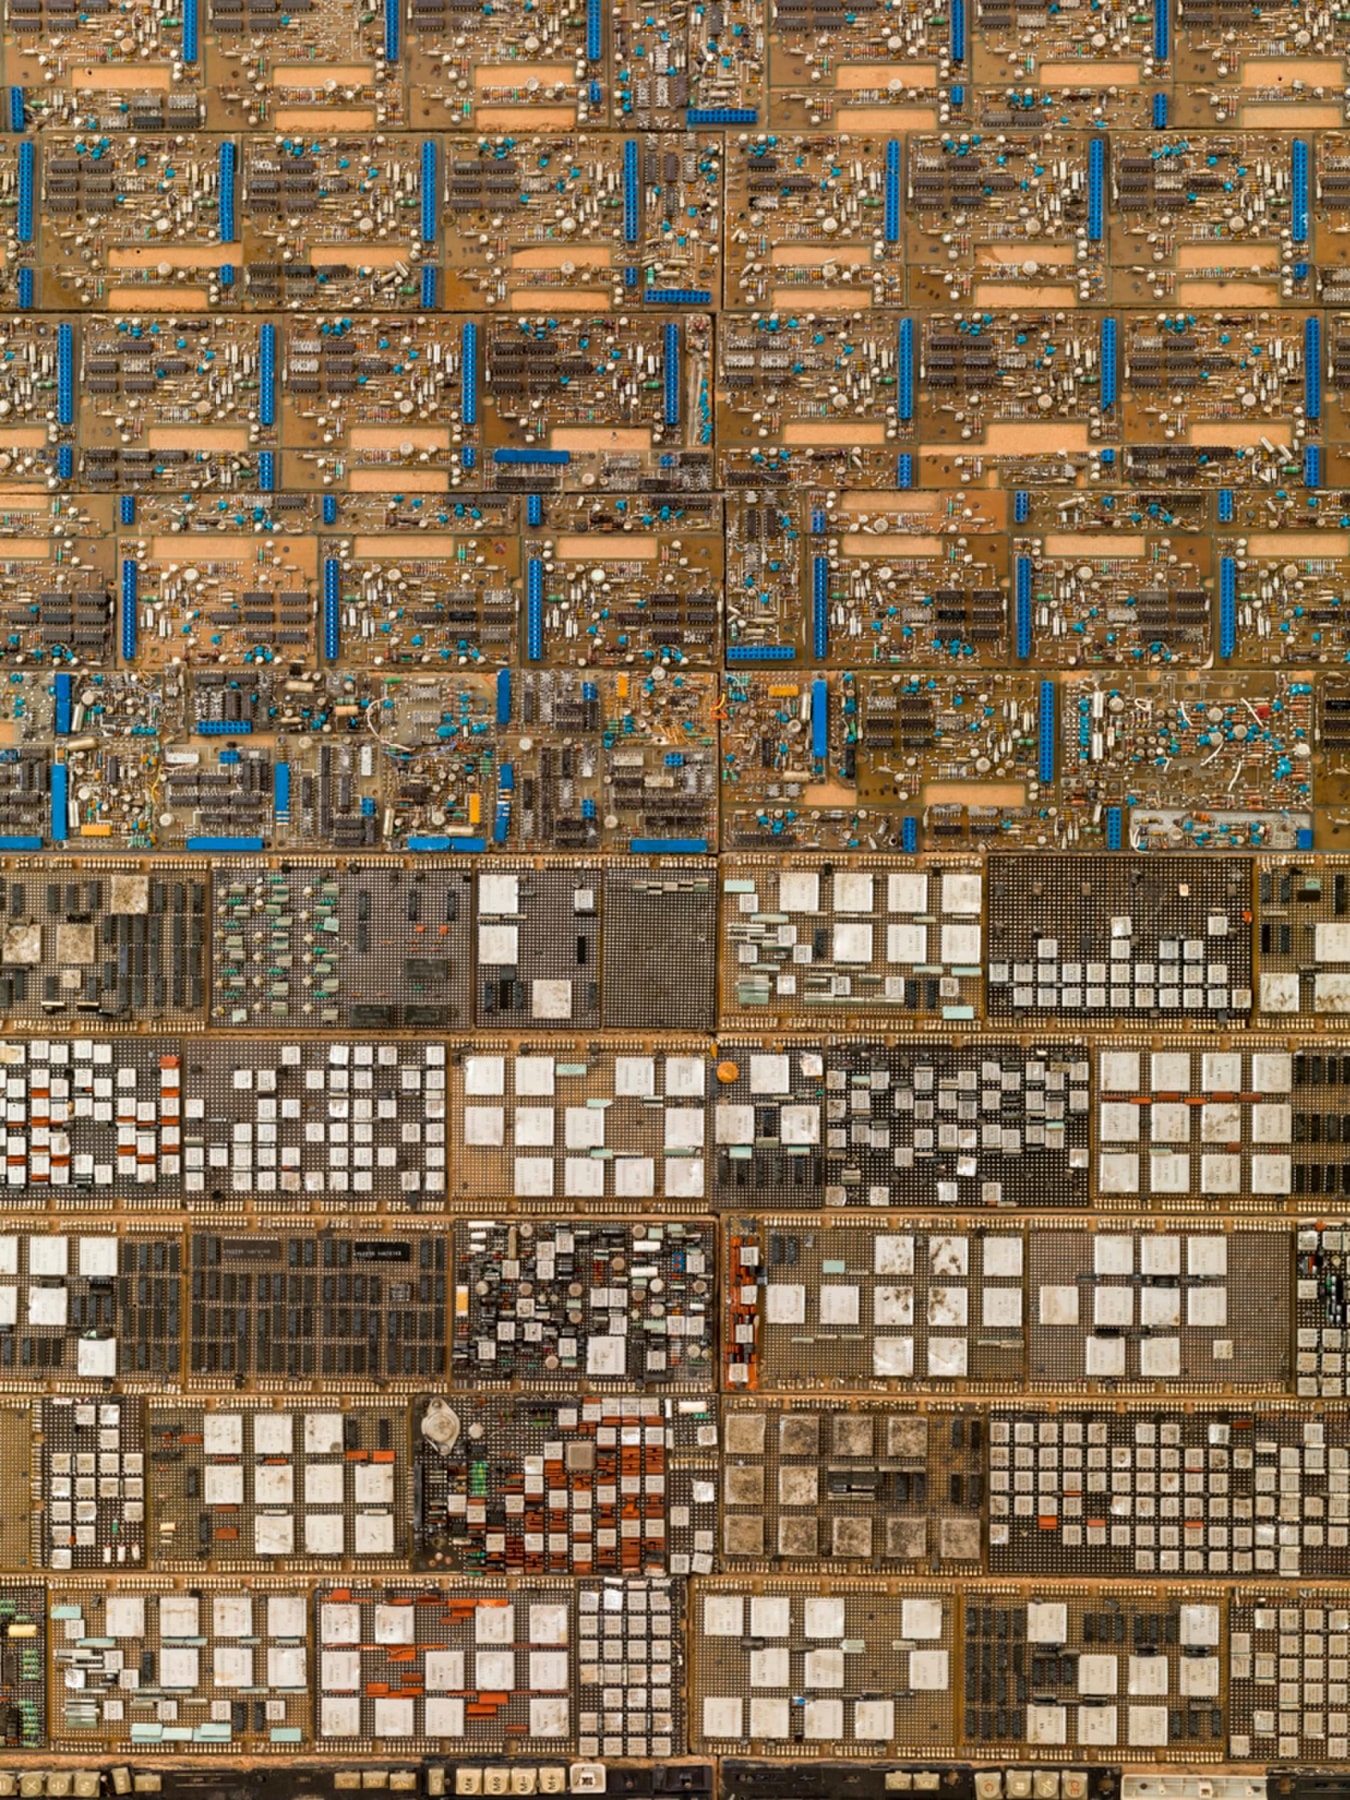 close up of electronic components